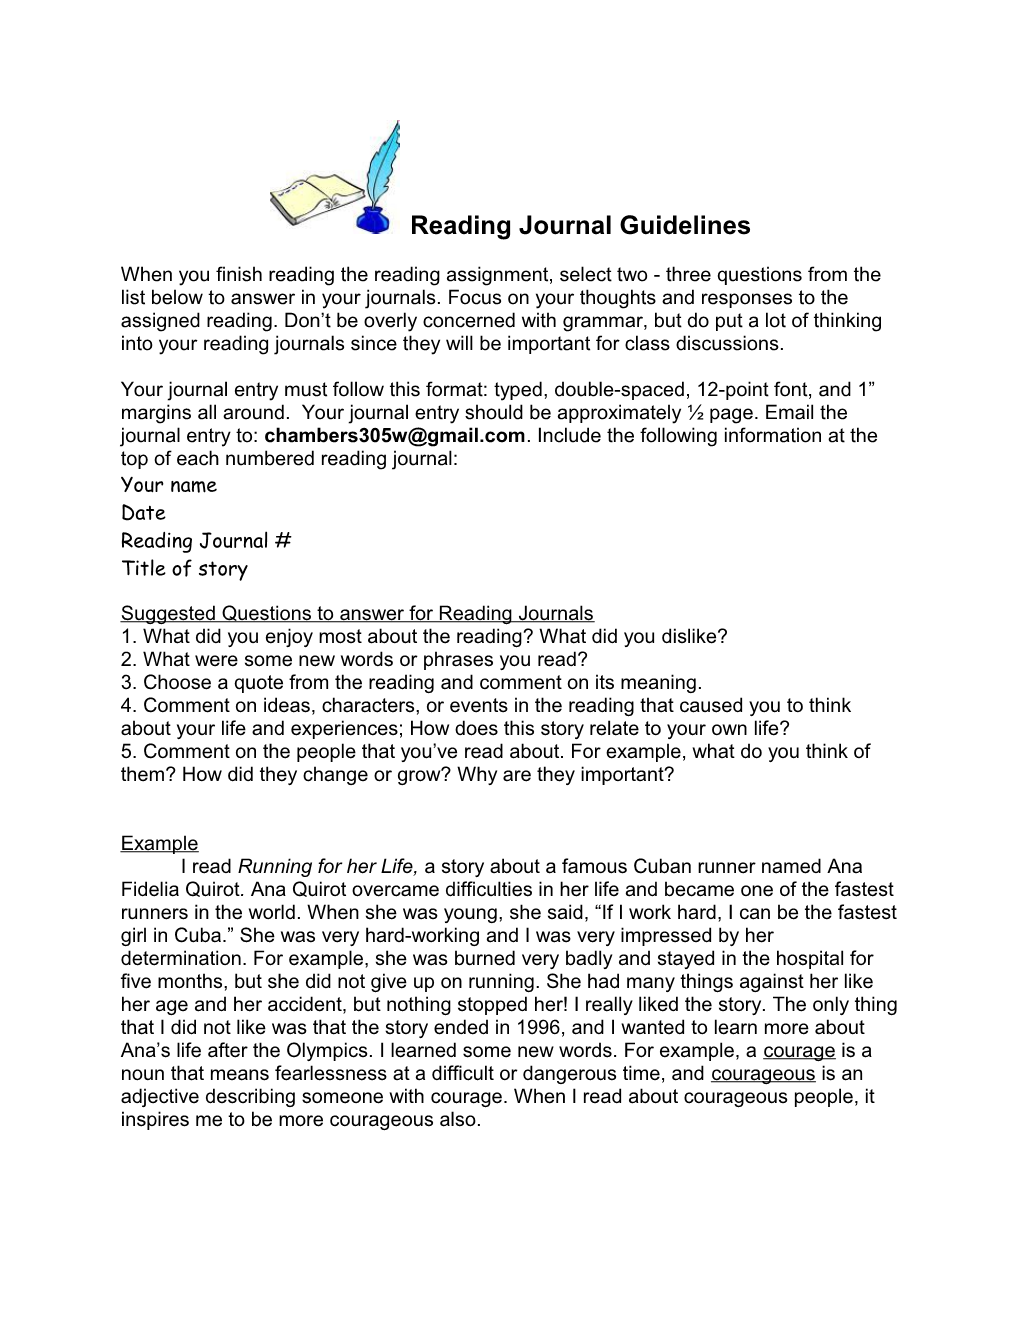 Reading Journal Guidelines